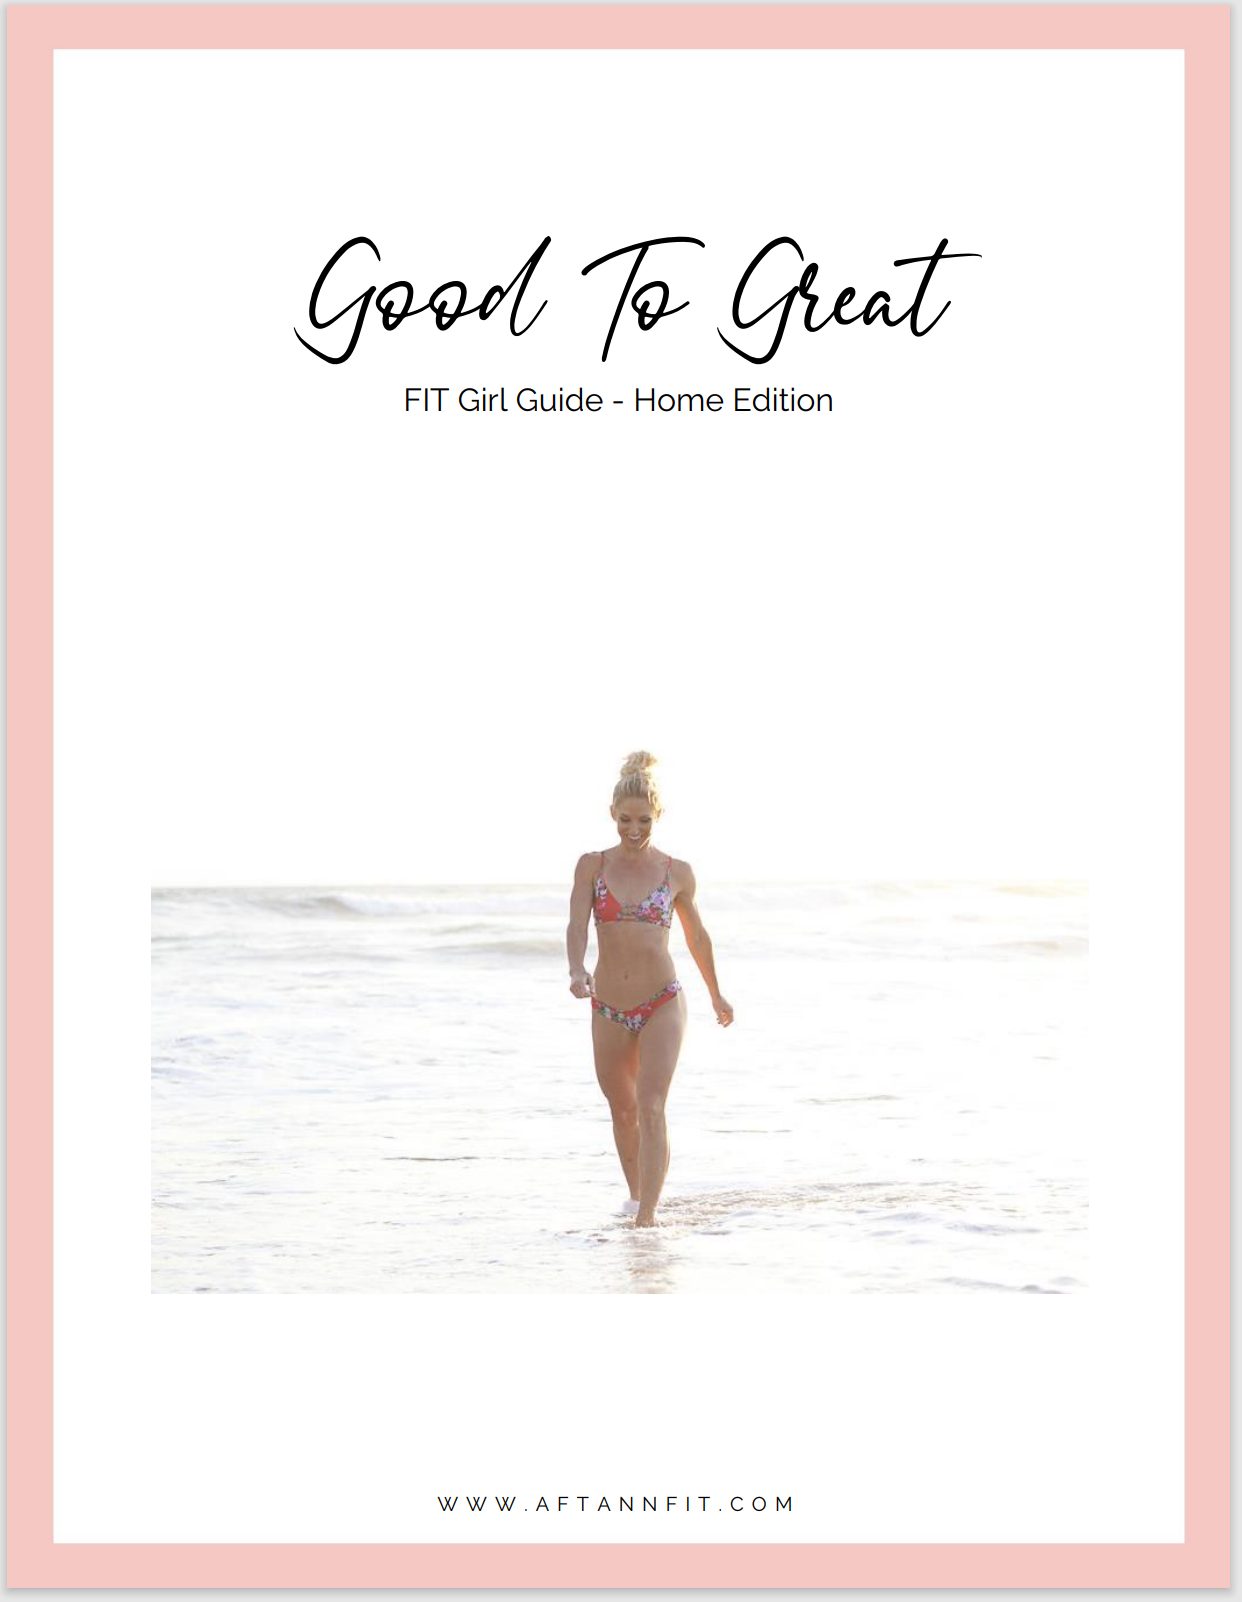 Good to Great Home Edition